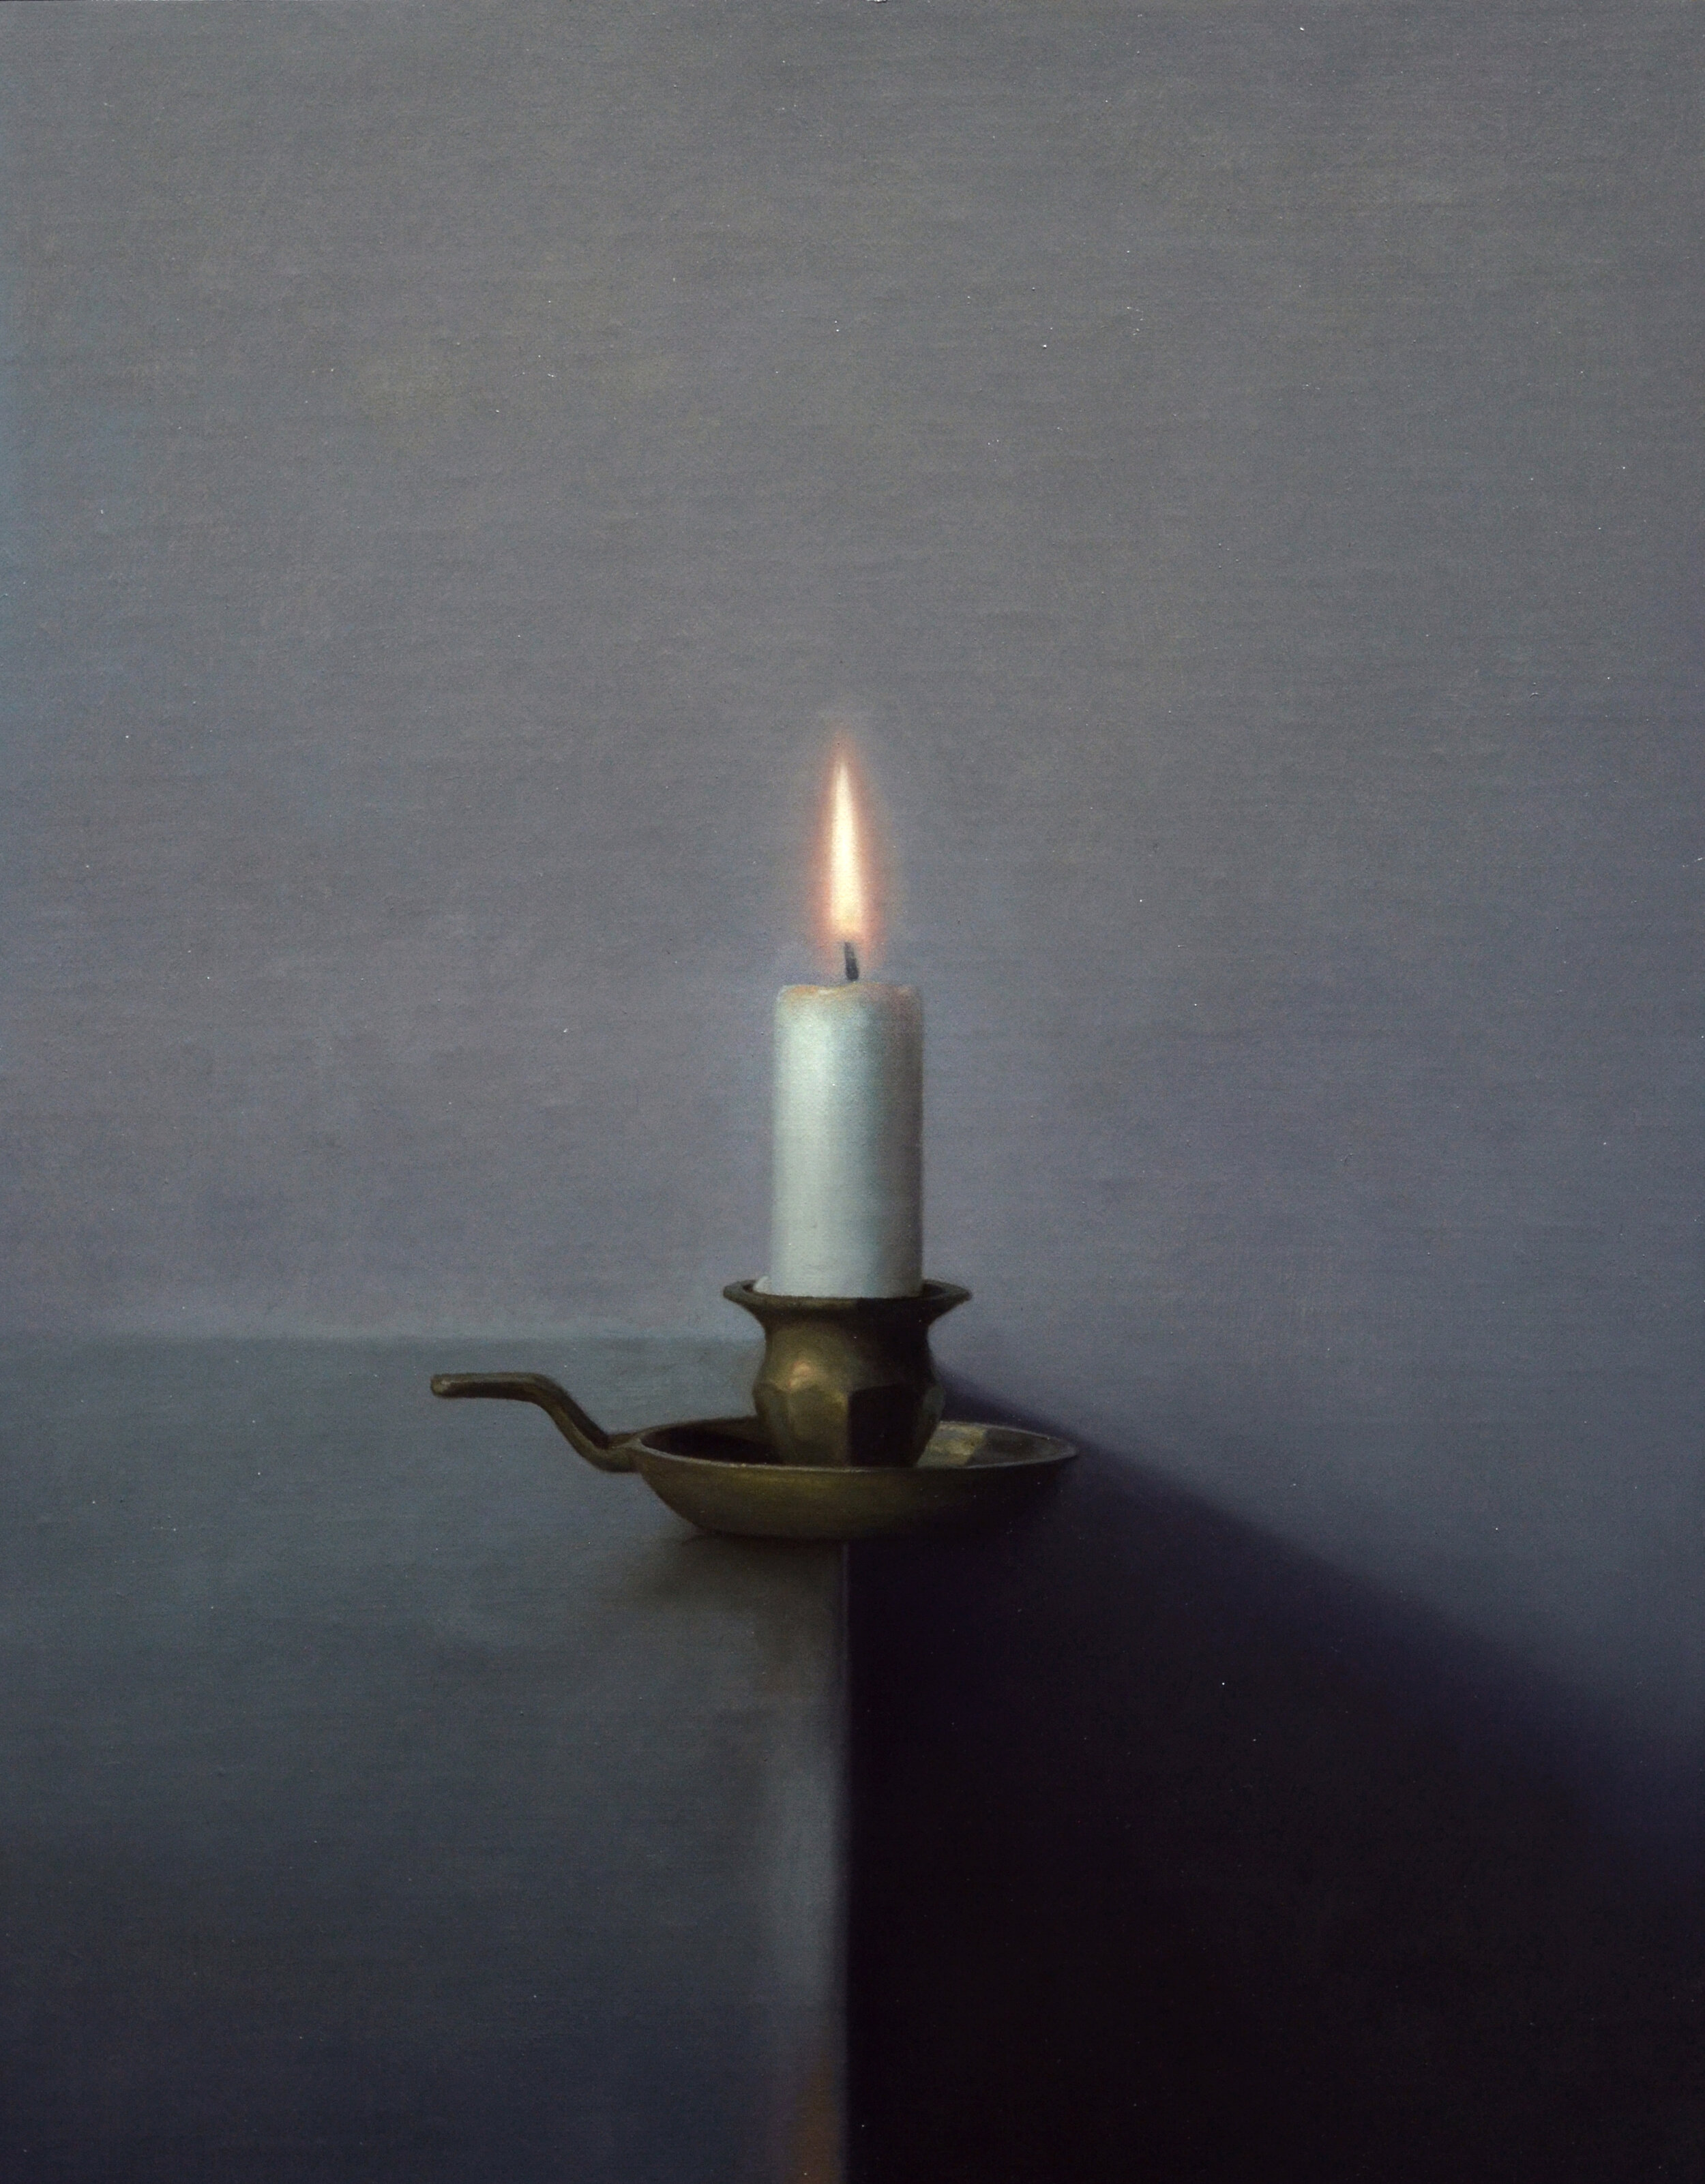   Candle , oil on linen mounted to board, 14” x 11”, 2020  This piece is part of a body of recent work currently on view at Winfield Gallery in Carmel-by-the-Sea, CA. https://winfieldgallery.com/ 